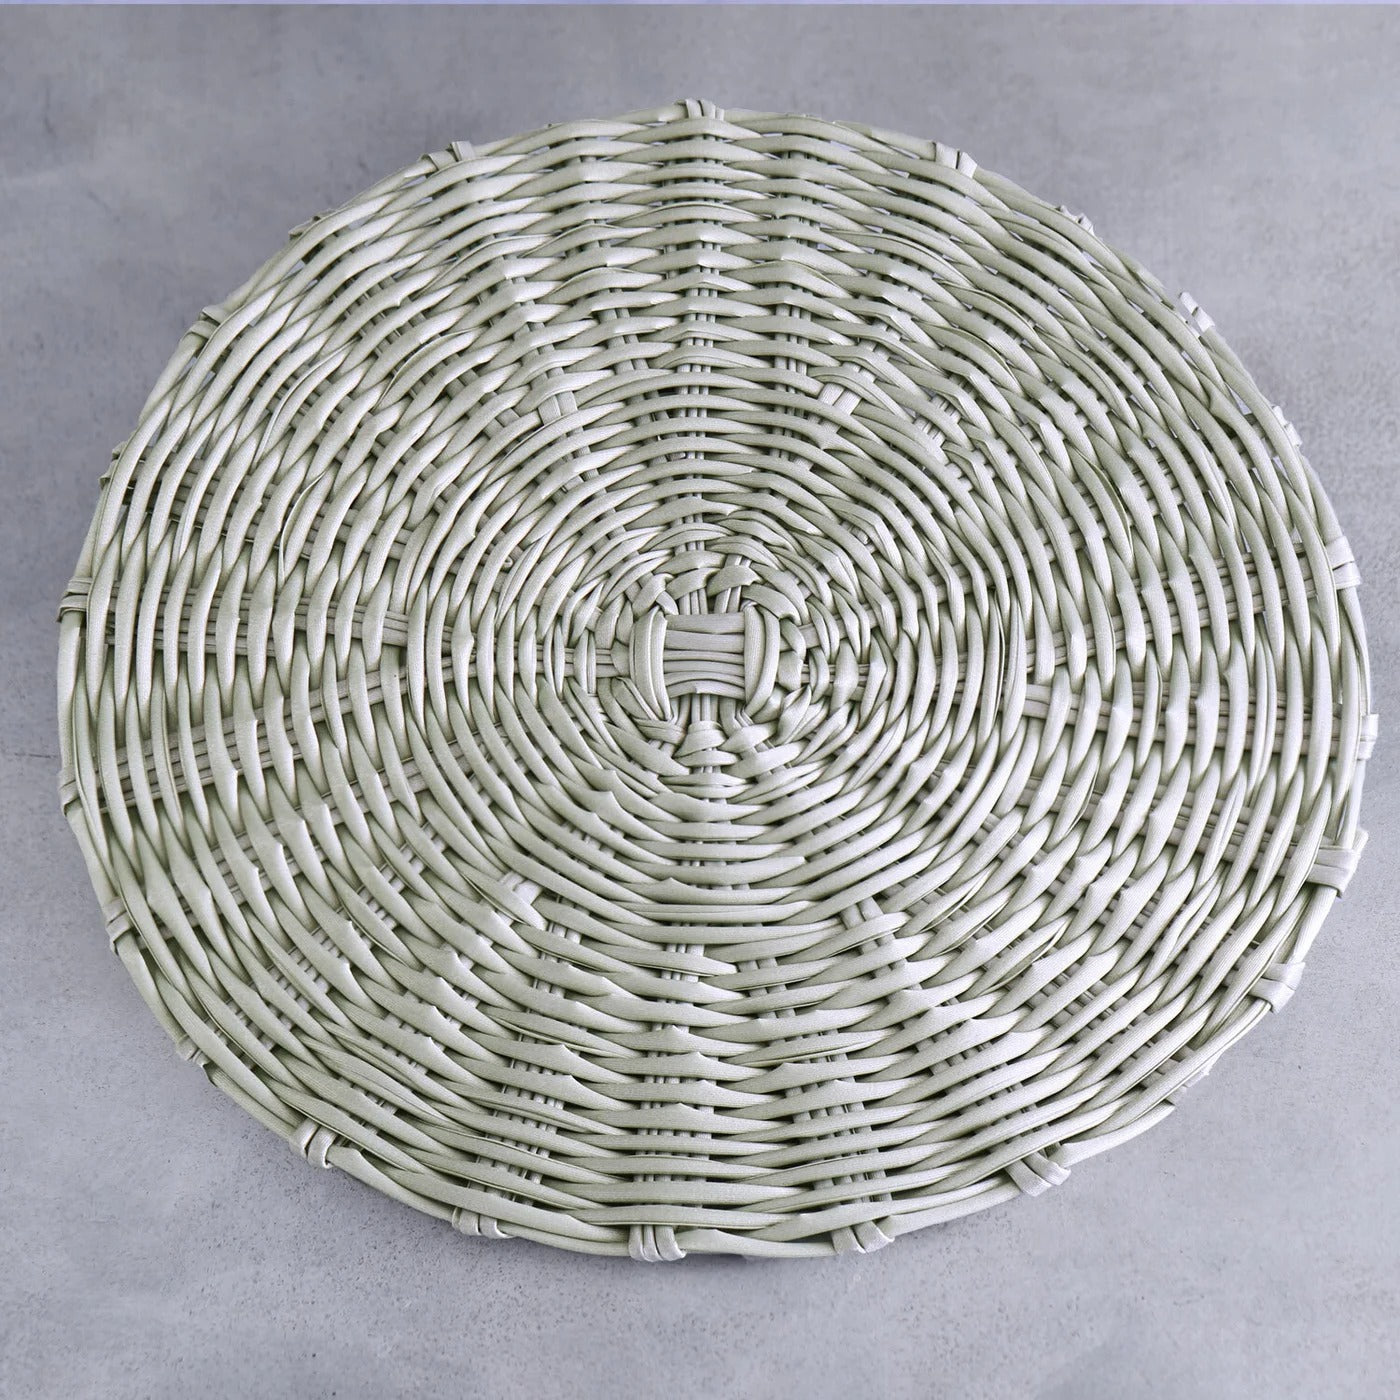 VIDA Faux Wicker Placemats Set of 4 (Seagrass)